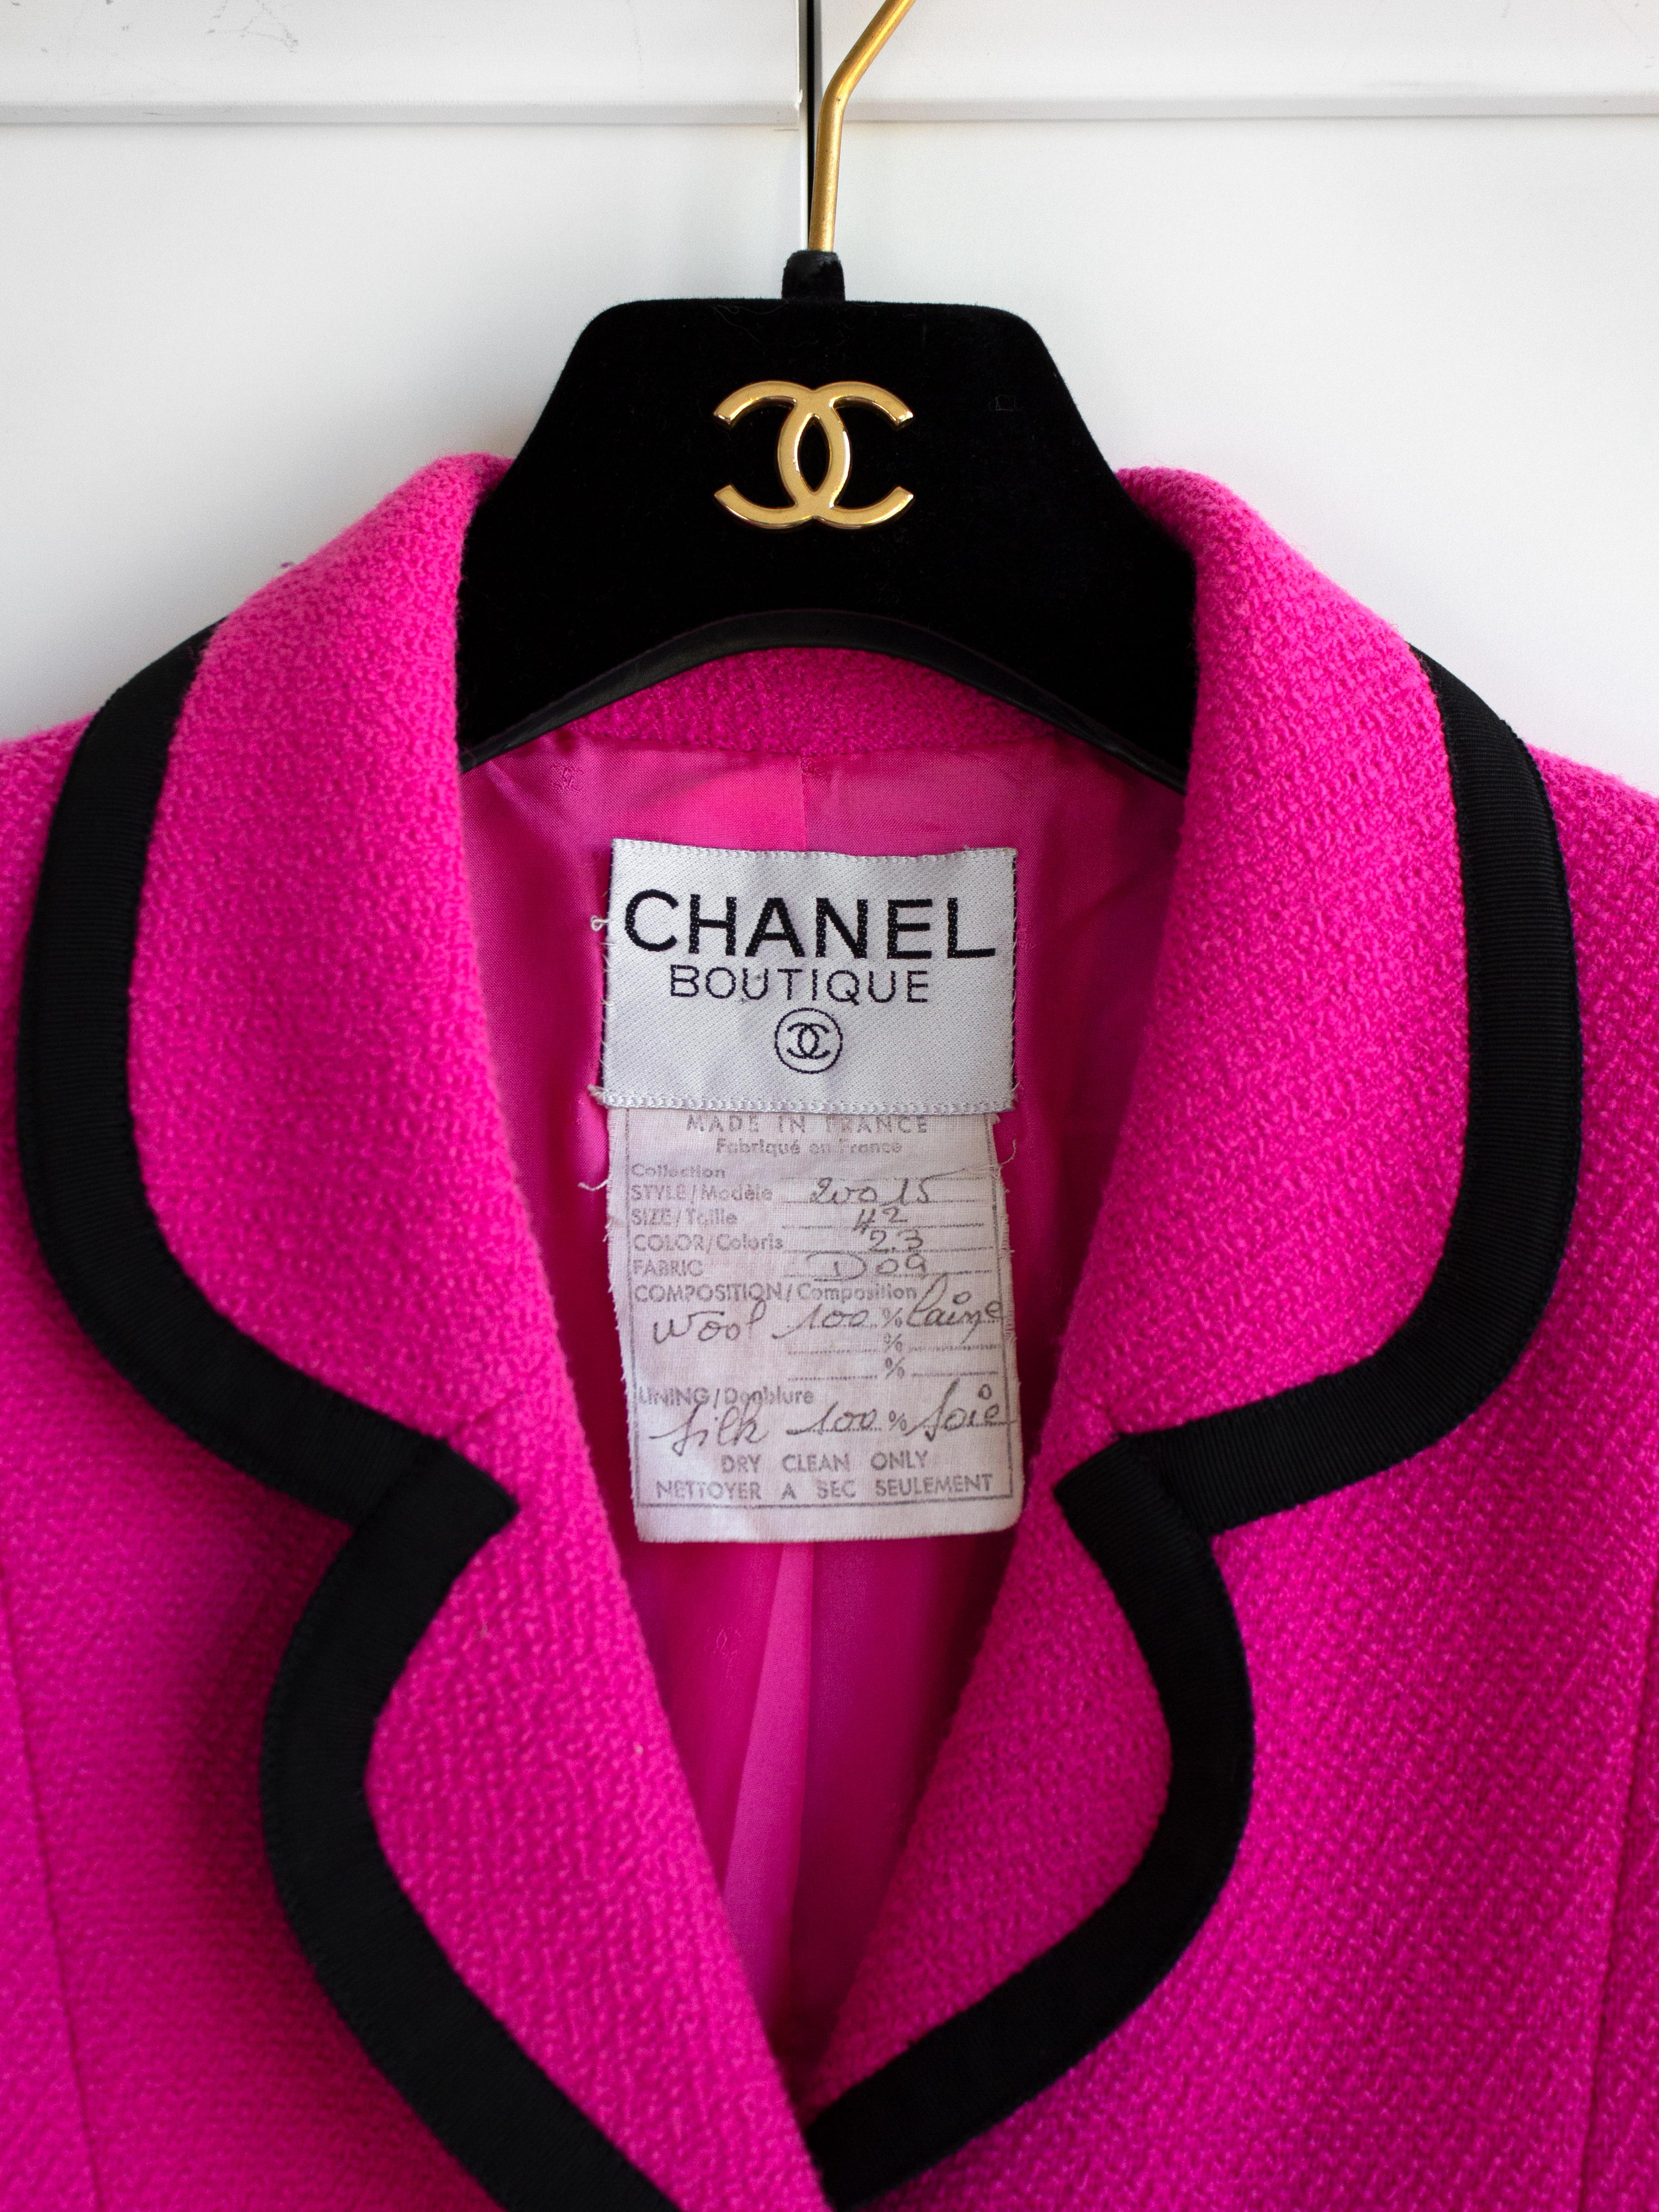 Chanel Vintage S/S 1991 Collector Fuchsia Pink Black Wool Jacket Skirt Suit For Sale 2